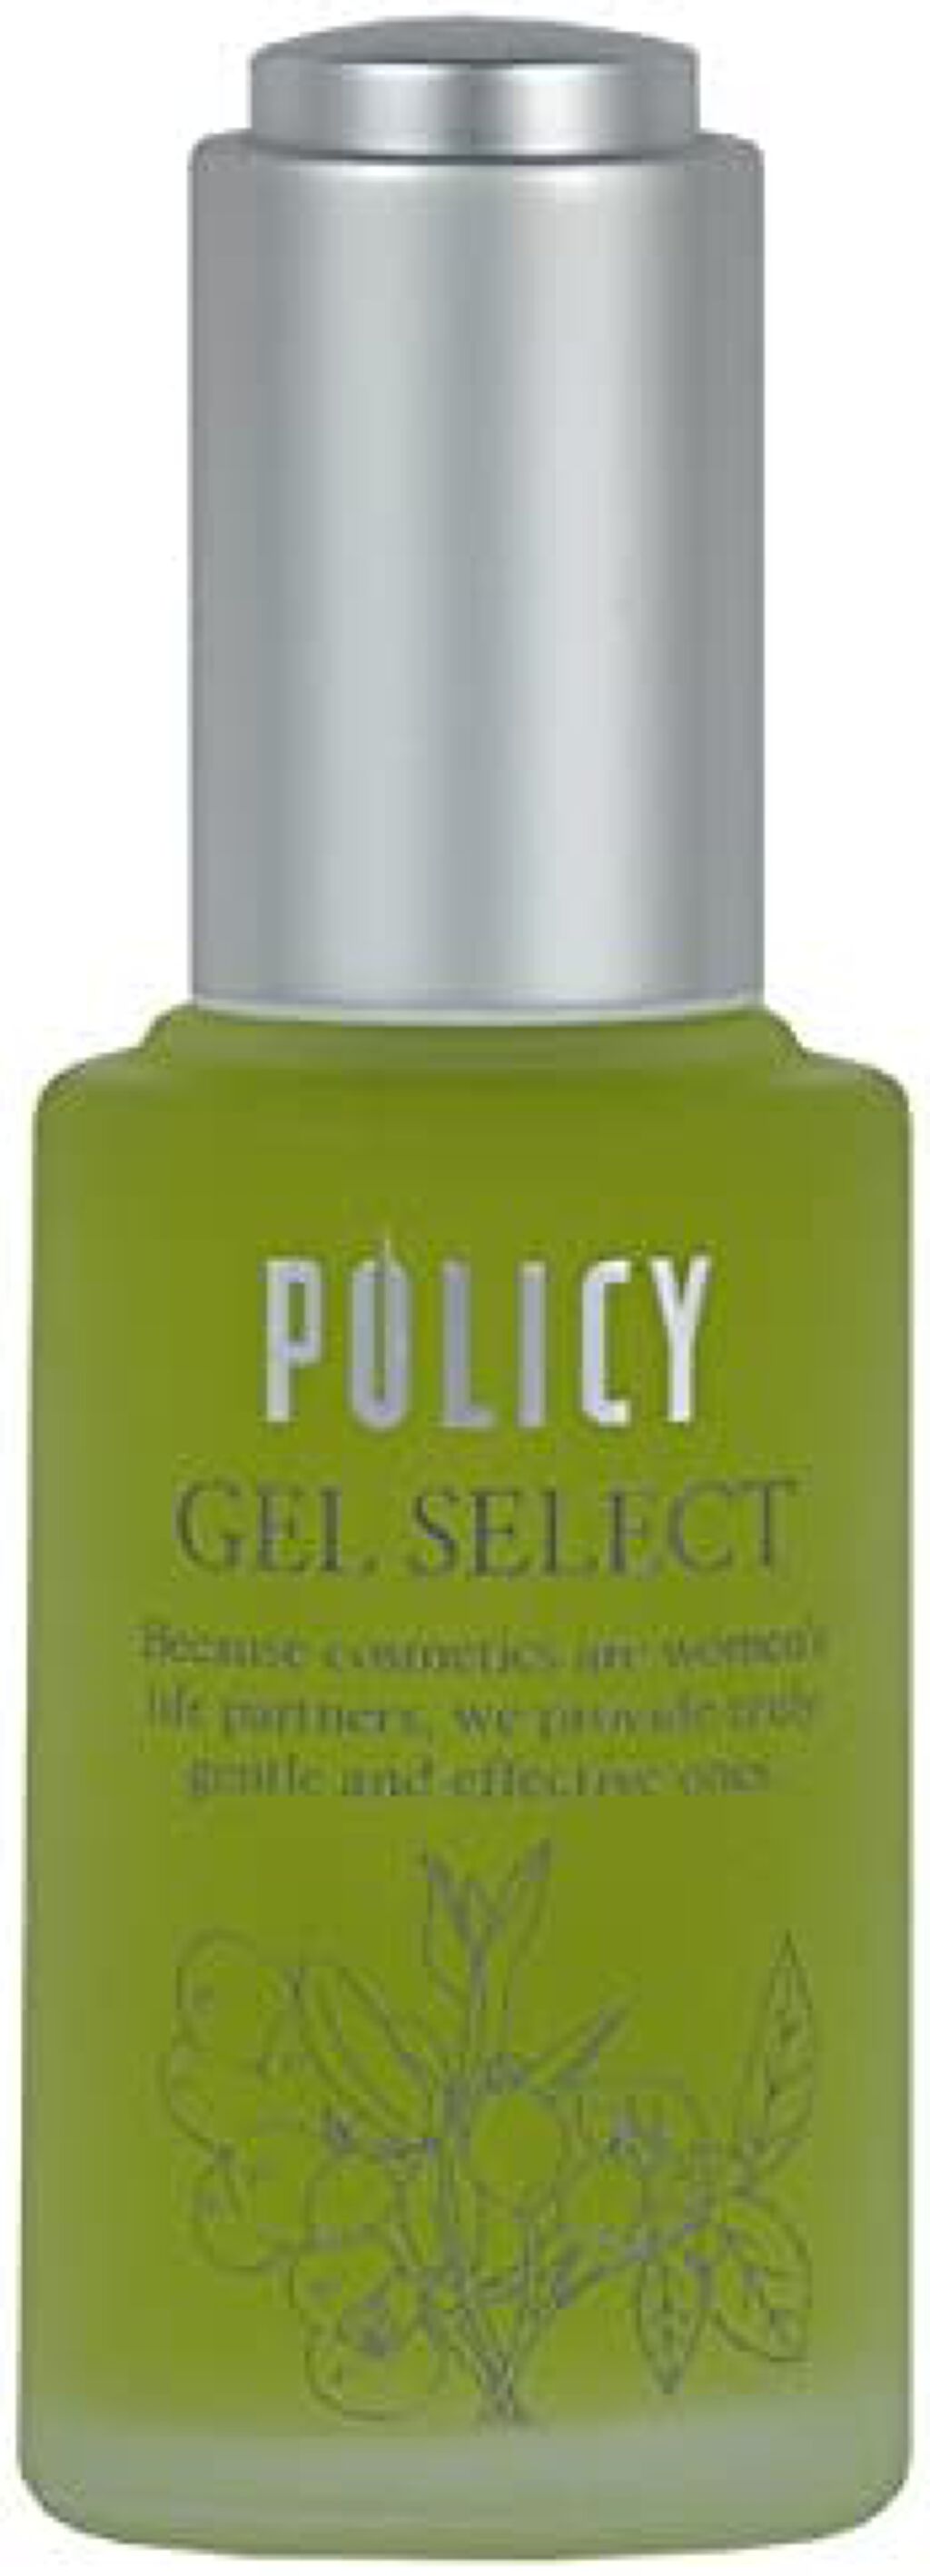 POLICY GEL SELECT